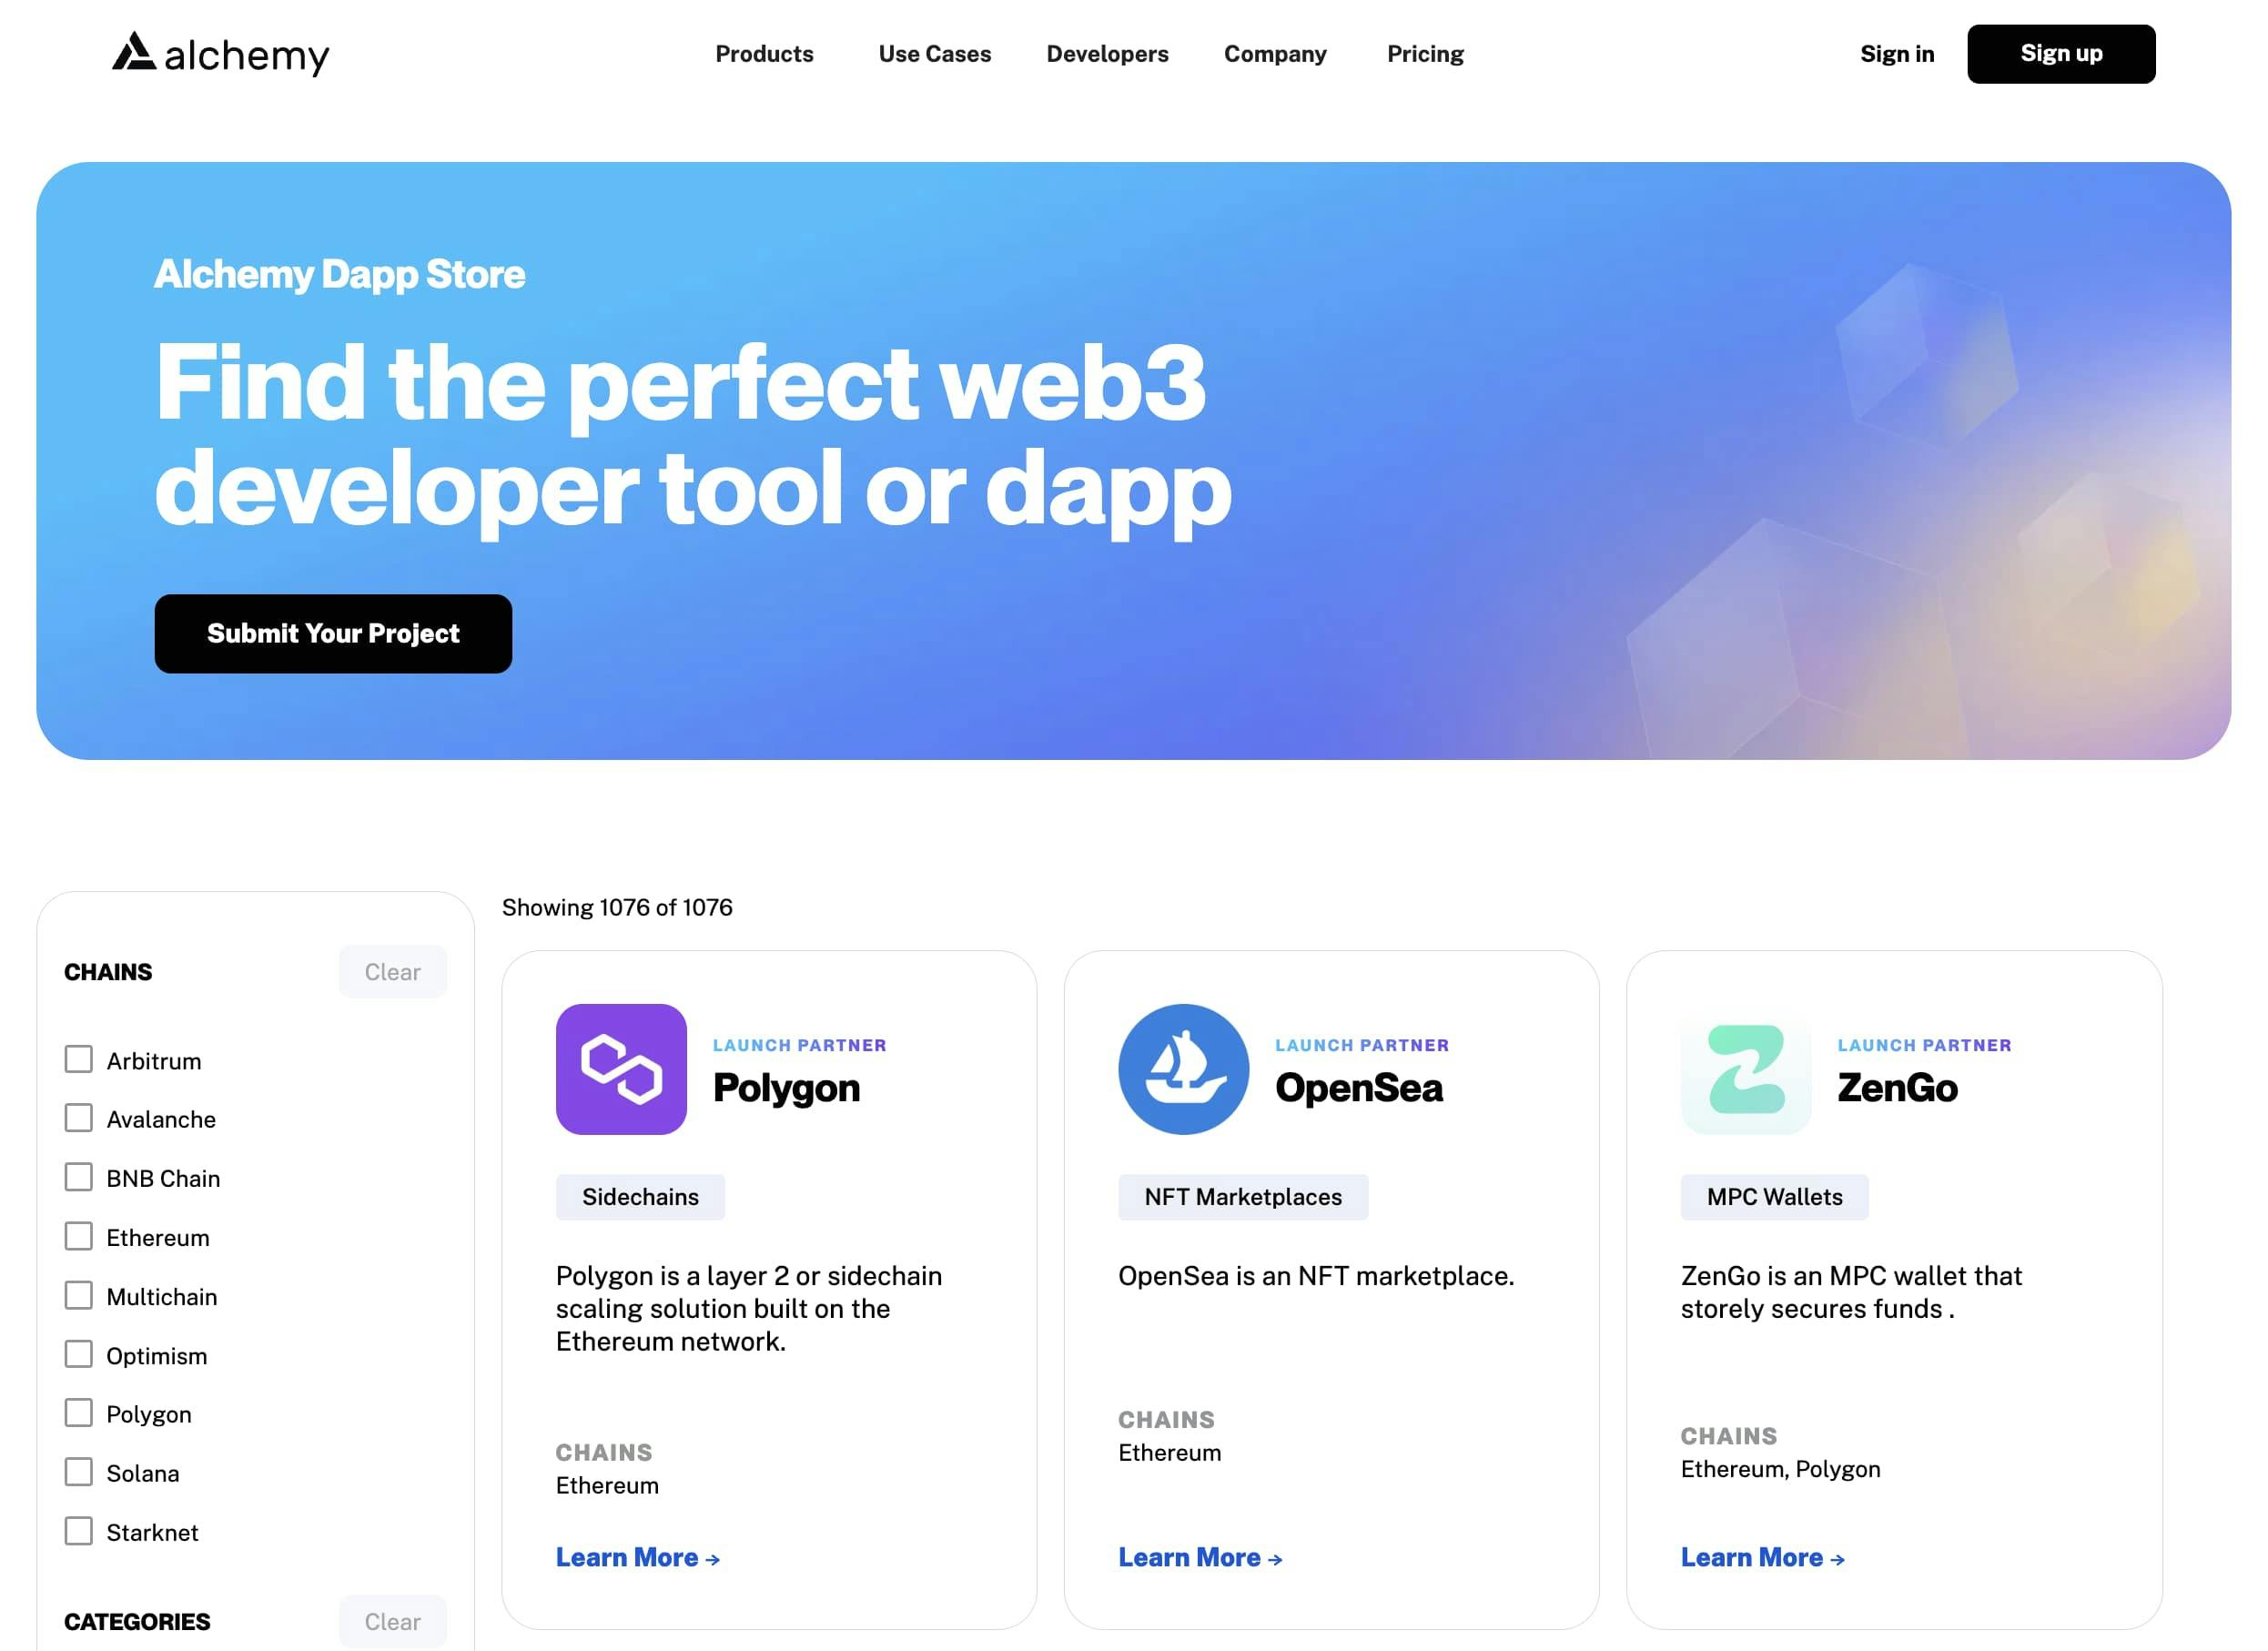 Alchemy Dapp Store where users can filter dapps and developer tools by chain and category.